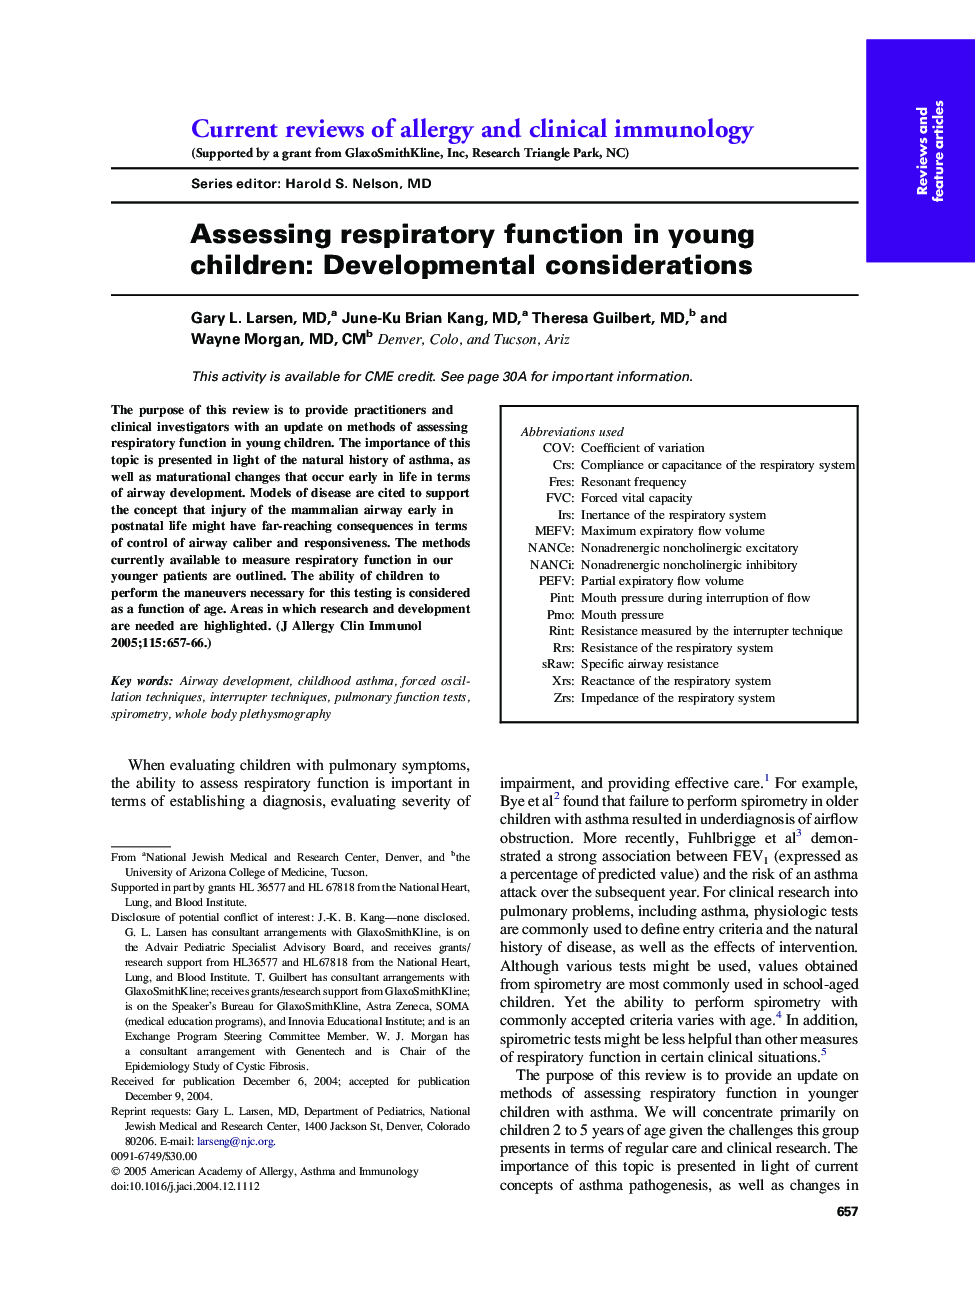 Assessing respiratory function in young children: Developmental considerations